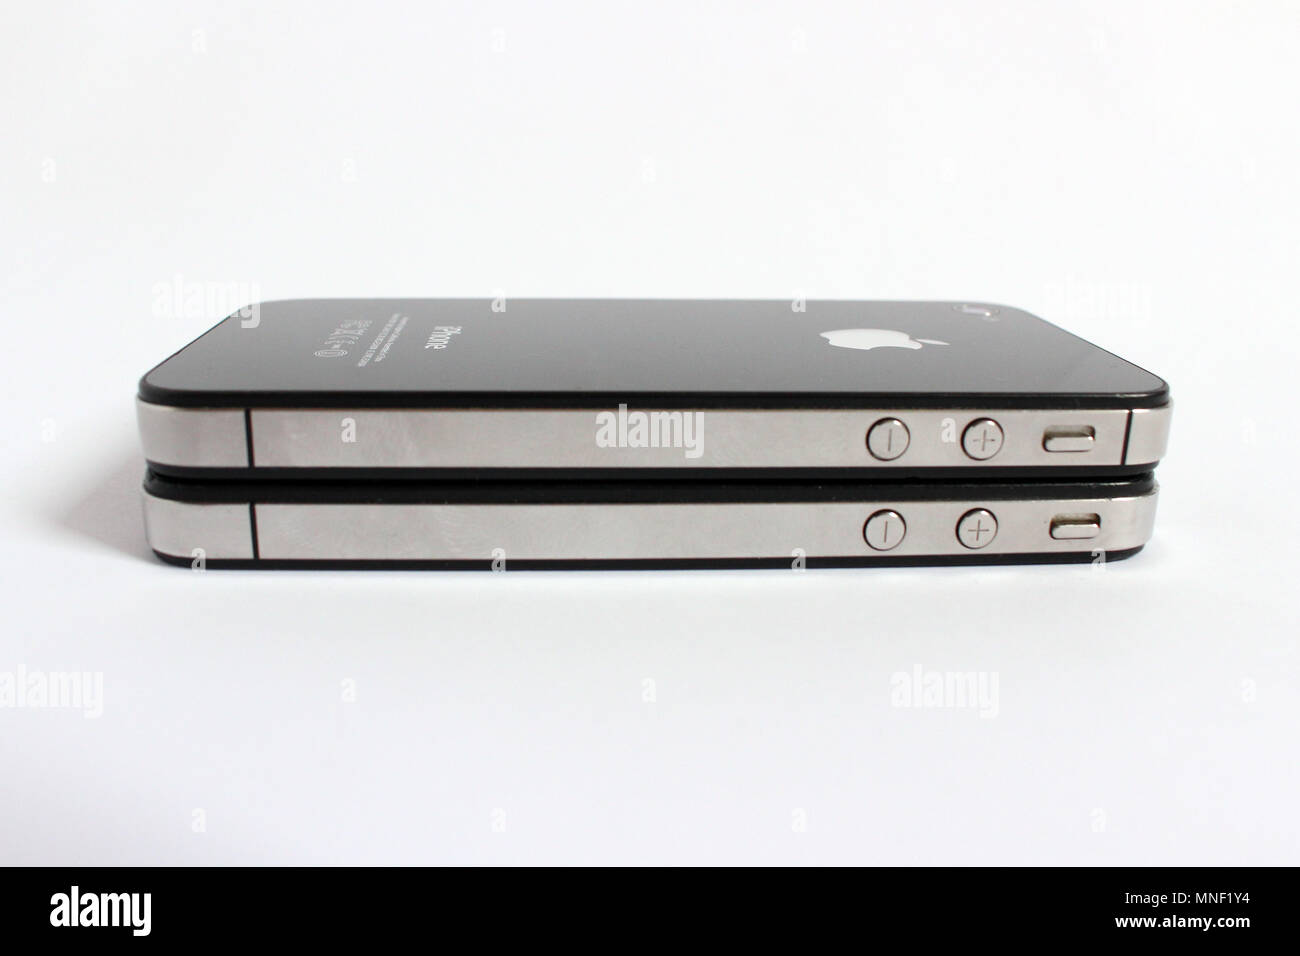 Iphone 4 and i-phone four s, twins smartphone, editorial Stock Photo